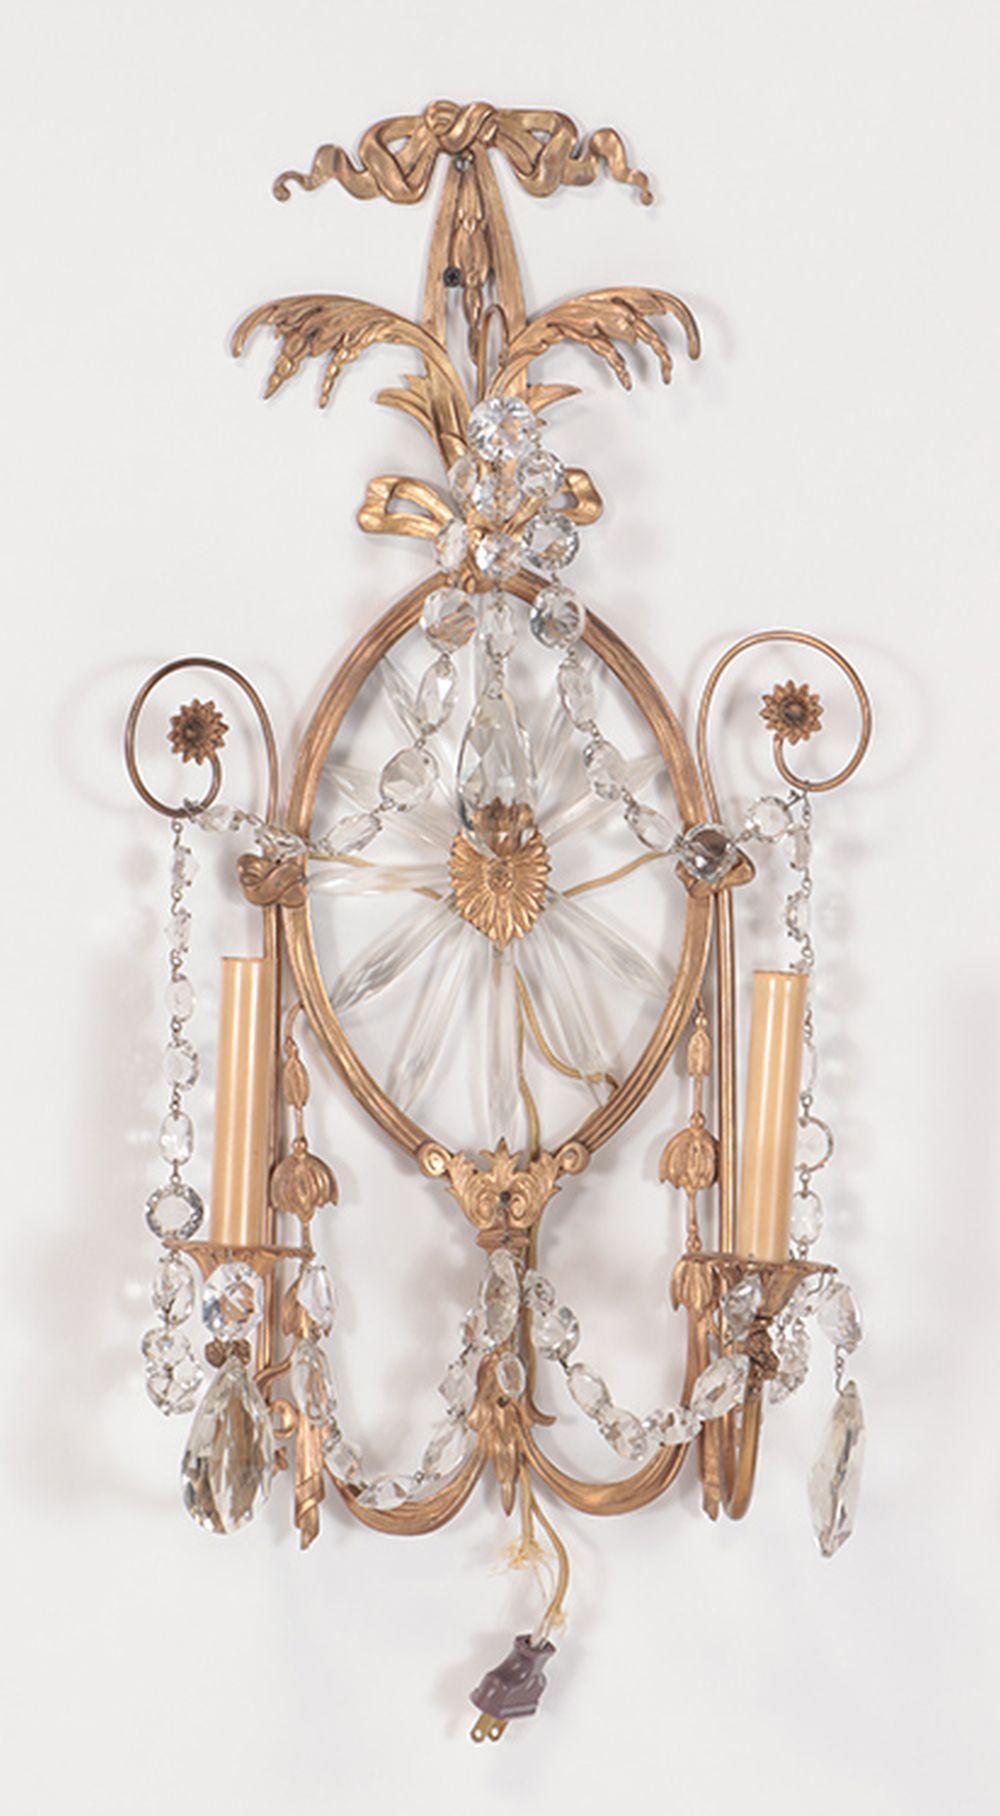 Pair of Early 20th century Regency Style Bronze & Crystal Wall Sconces
Stunning pair of sconces that will add so much style and glamour to a home.
Wired for electricity and ready to be installed in the right room. circa 1920s.
Measure: 22.5